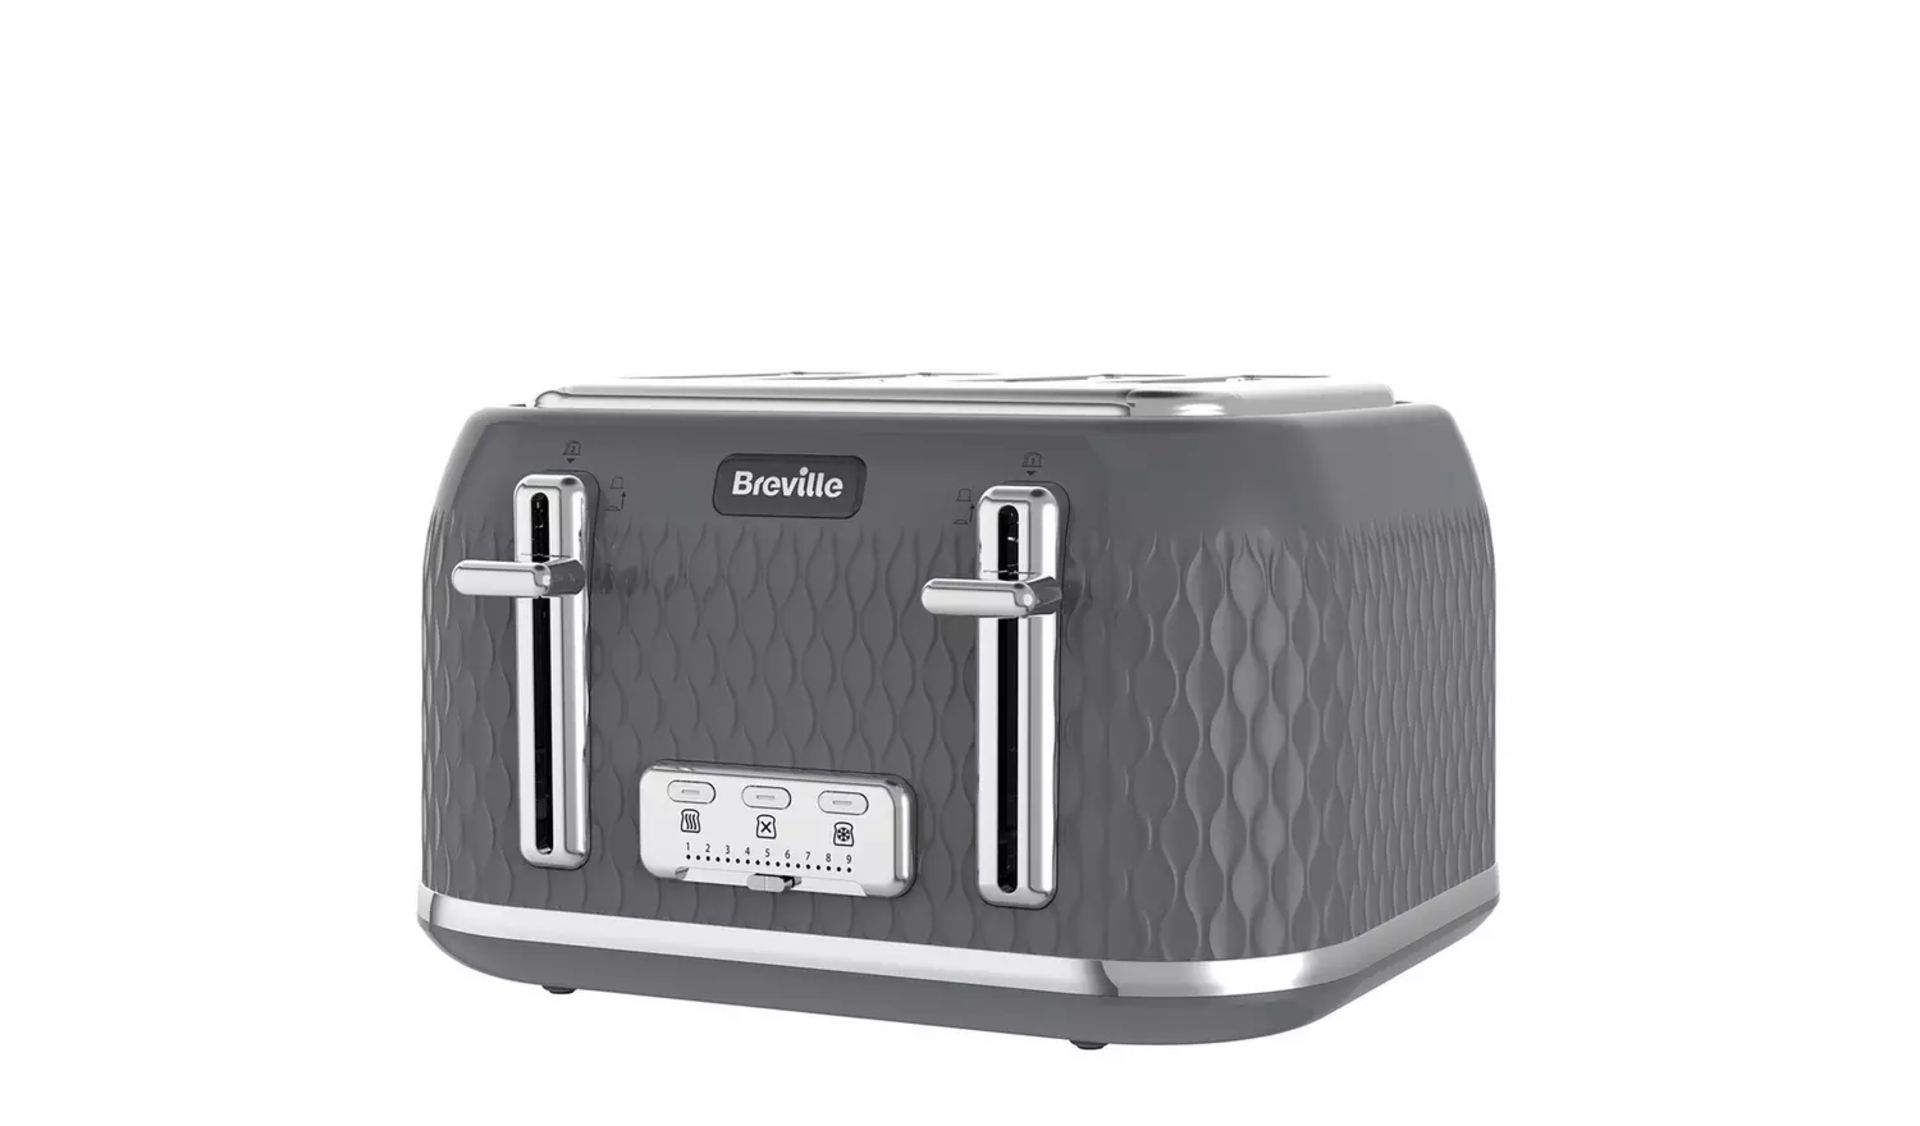 Breville VTR013 Curve 4 Slice Toaster - Grey and Chrome